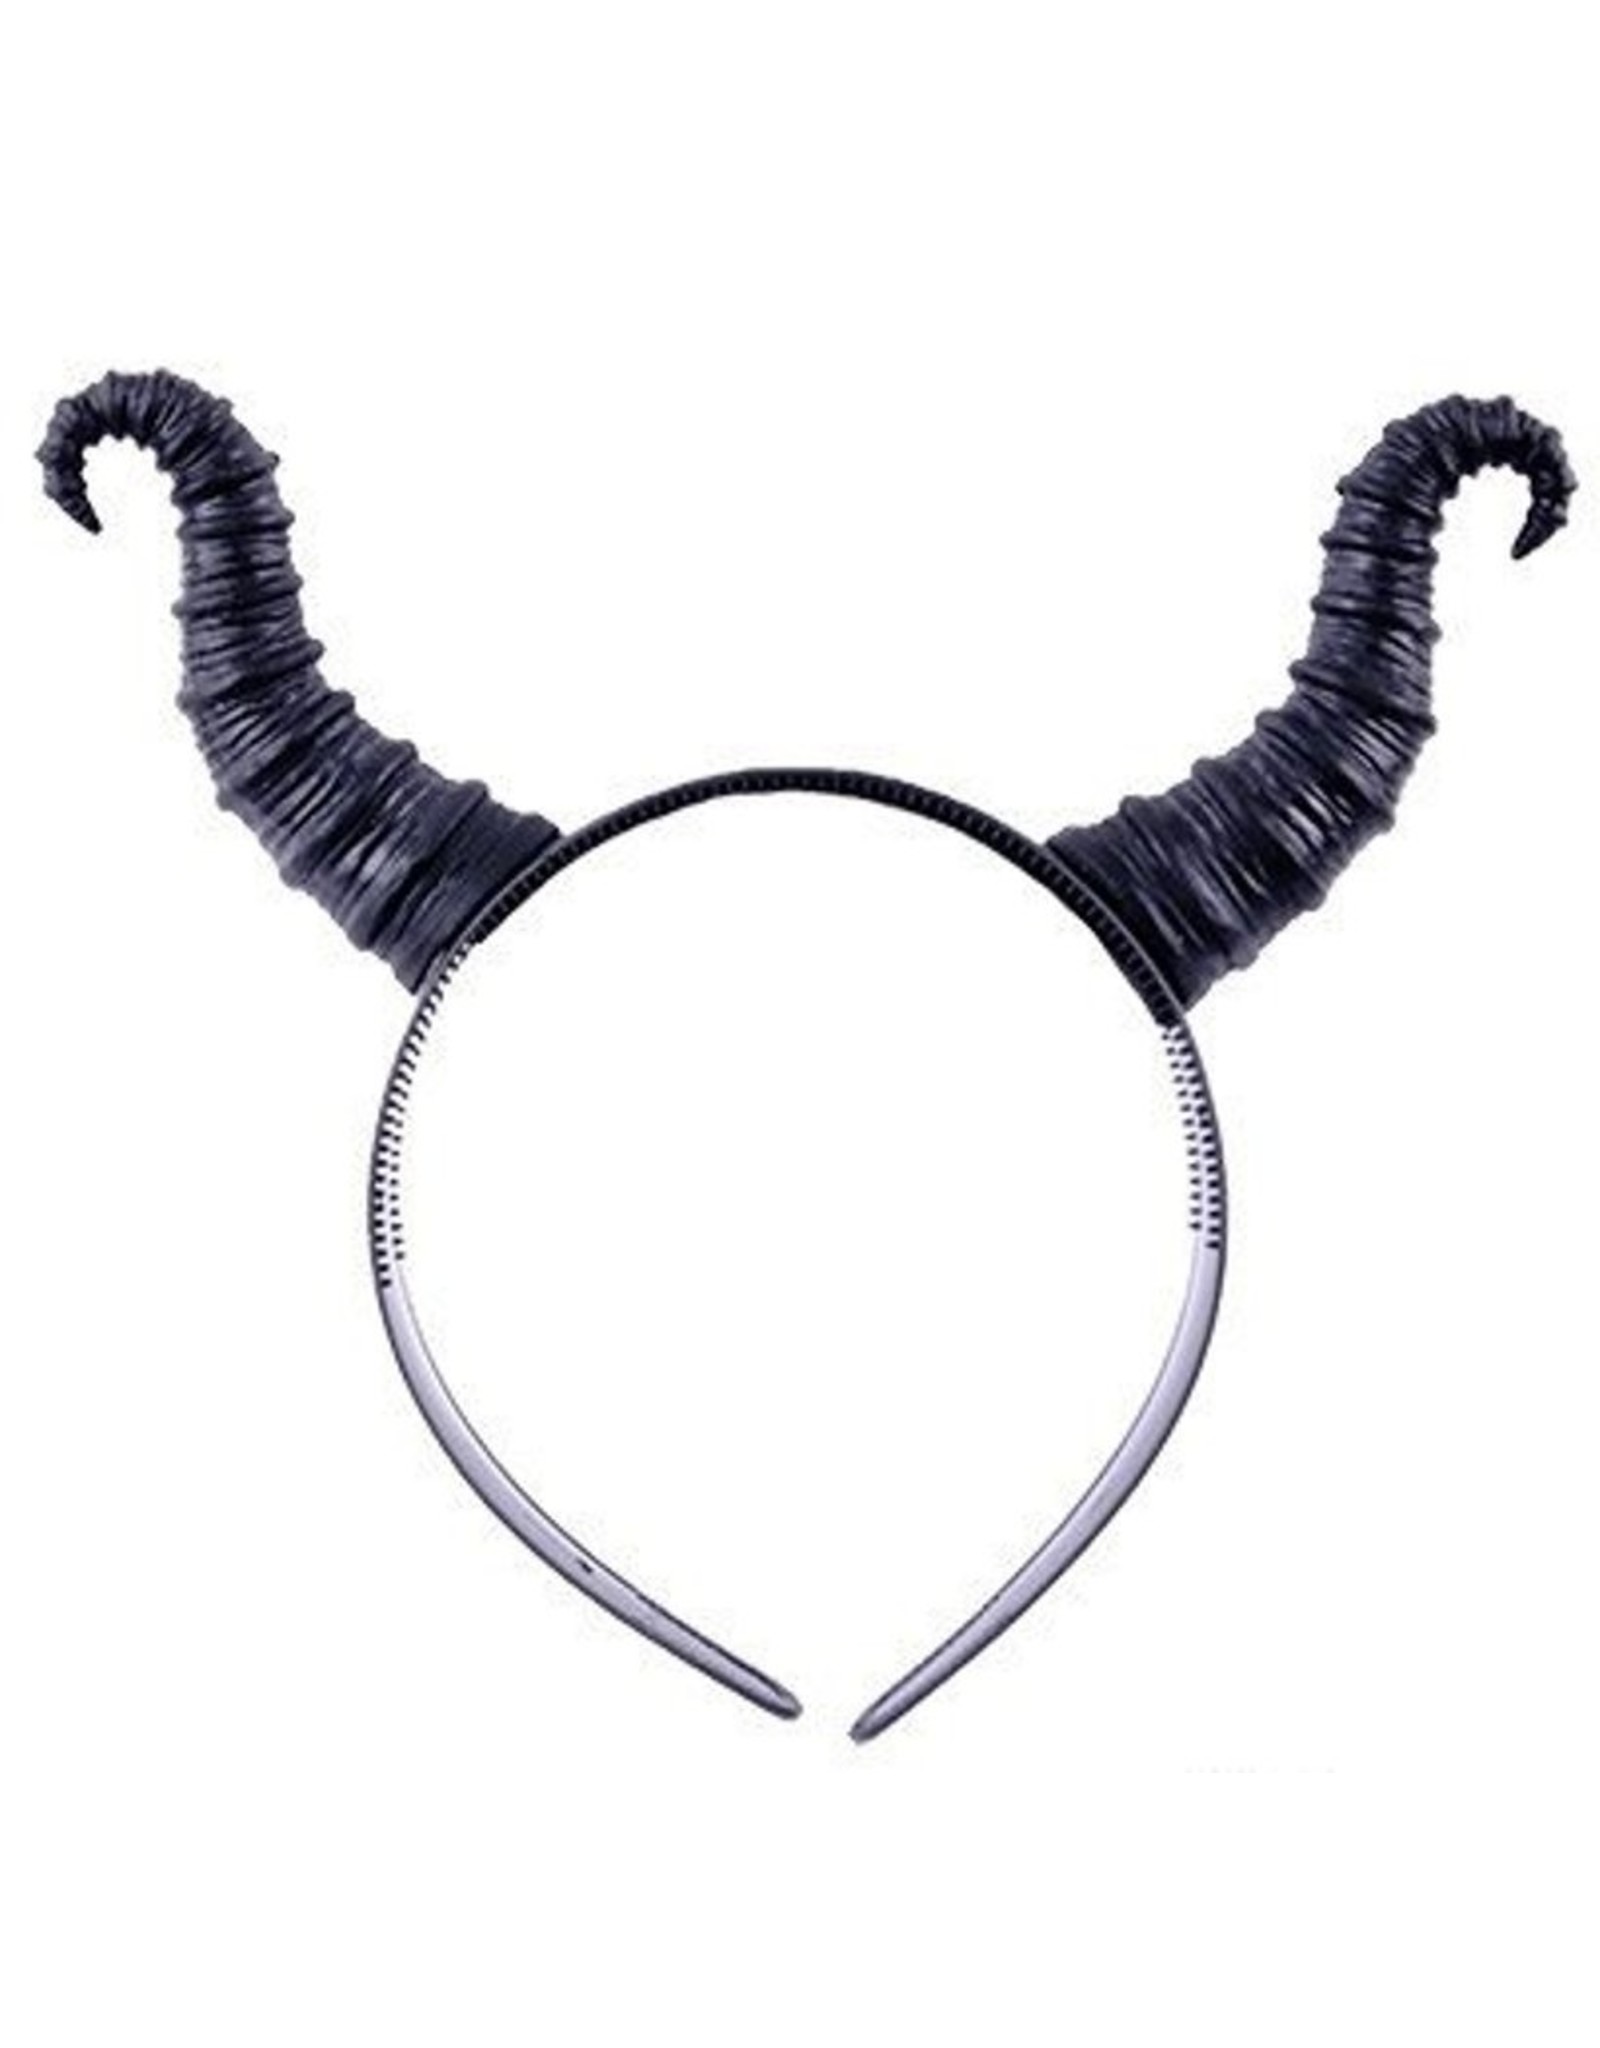 Restyle Gothic and Steampunk accessories - Maleficent Horns Gothic and Fantasy headband